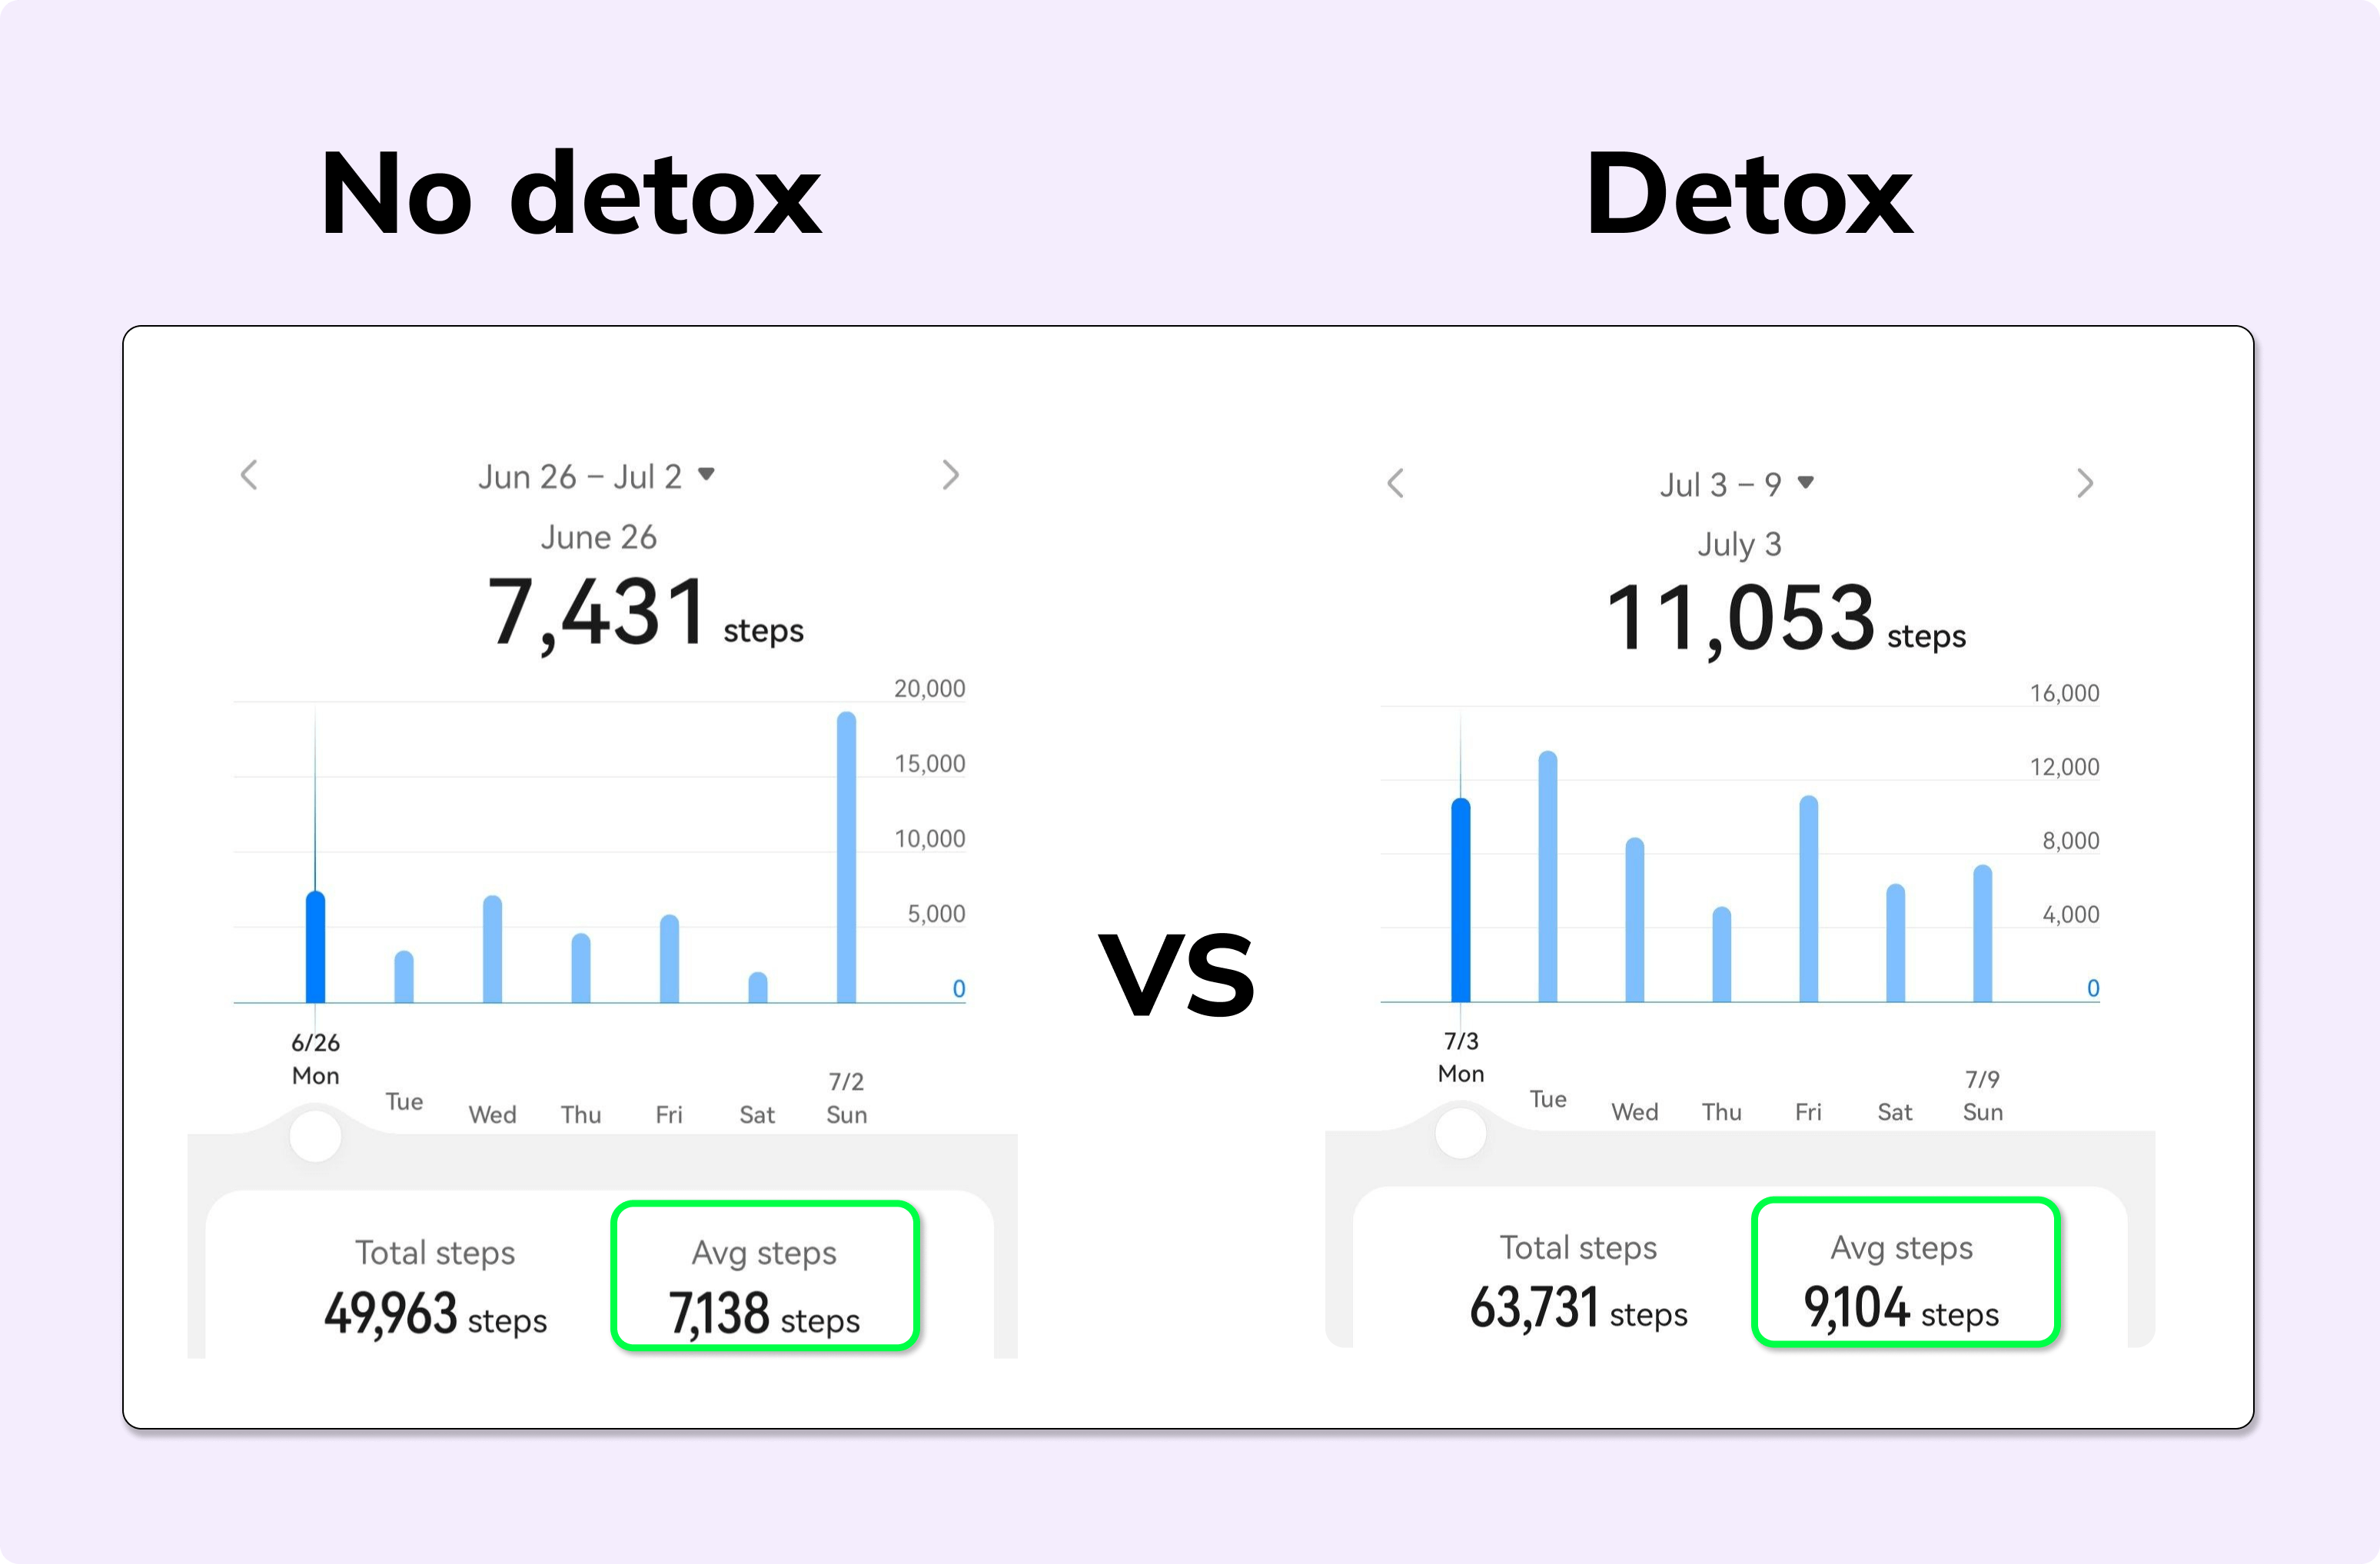 Two Huawei Health weekly walking statistics screenshots from before and during dopamine detox, the no-detox week has 7138 average steps and the detox week has 9104 steps